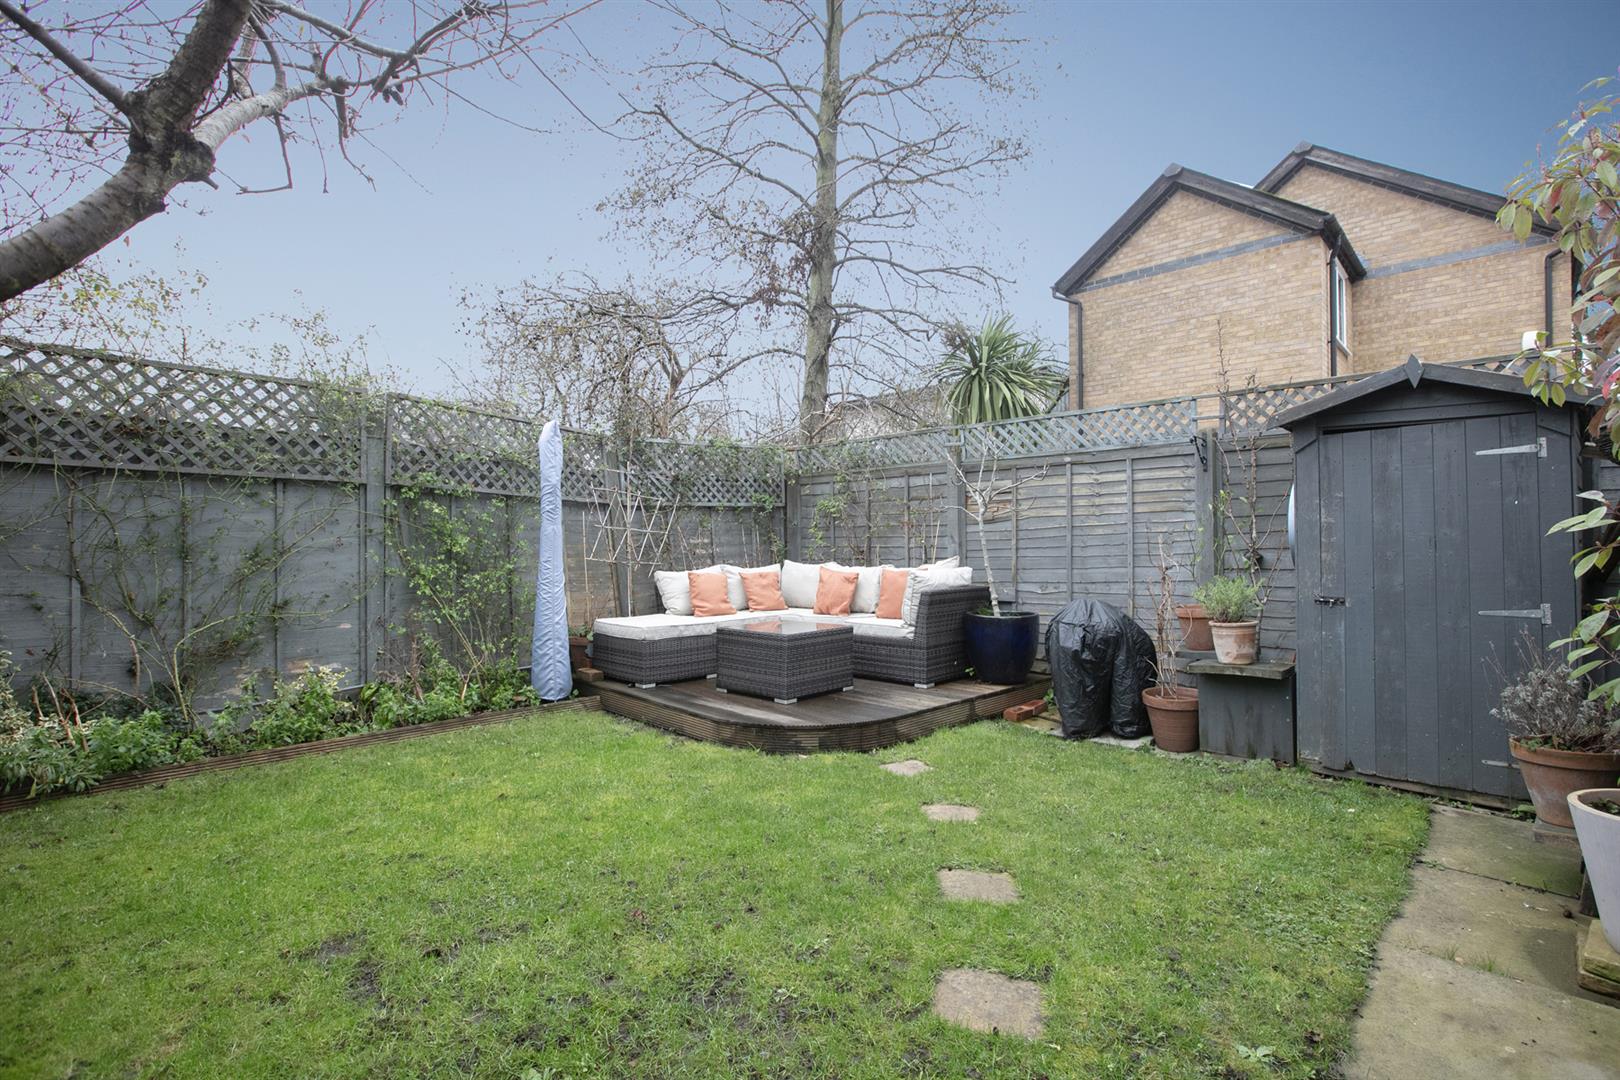 Flat - Conversion For Sale in Consort Road, Nunhead, SE15 1183 view21